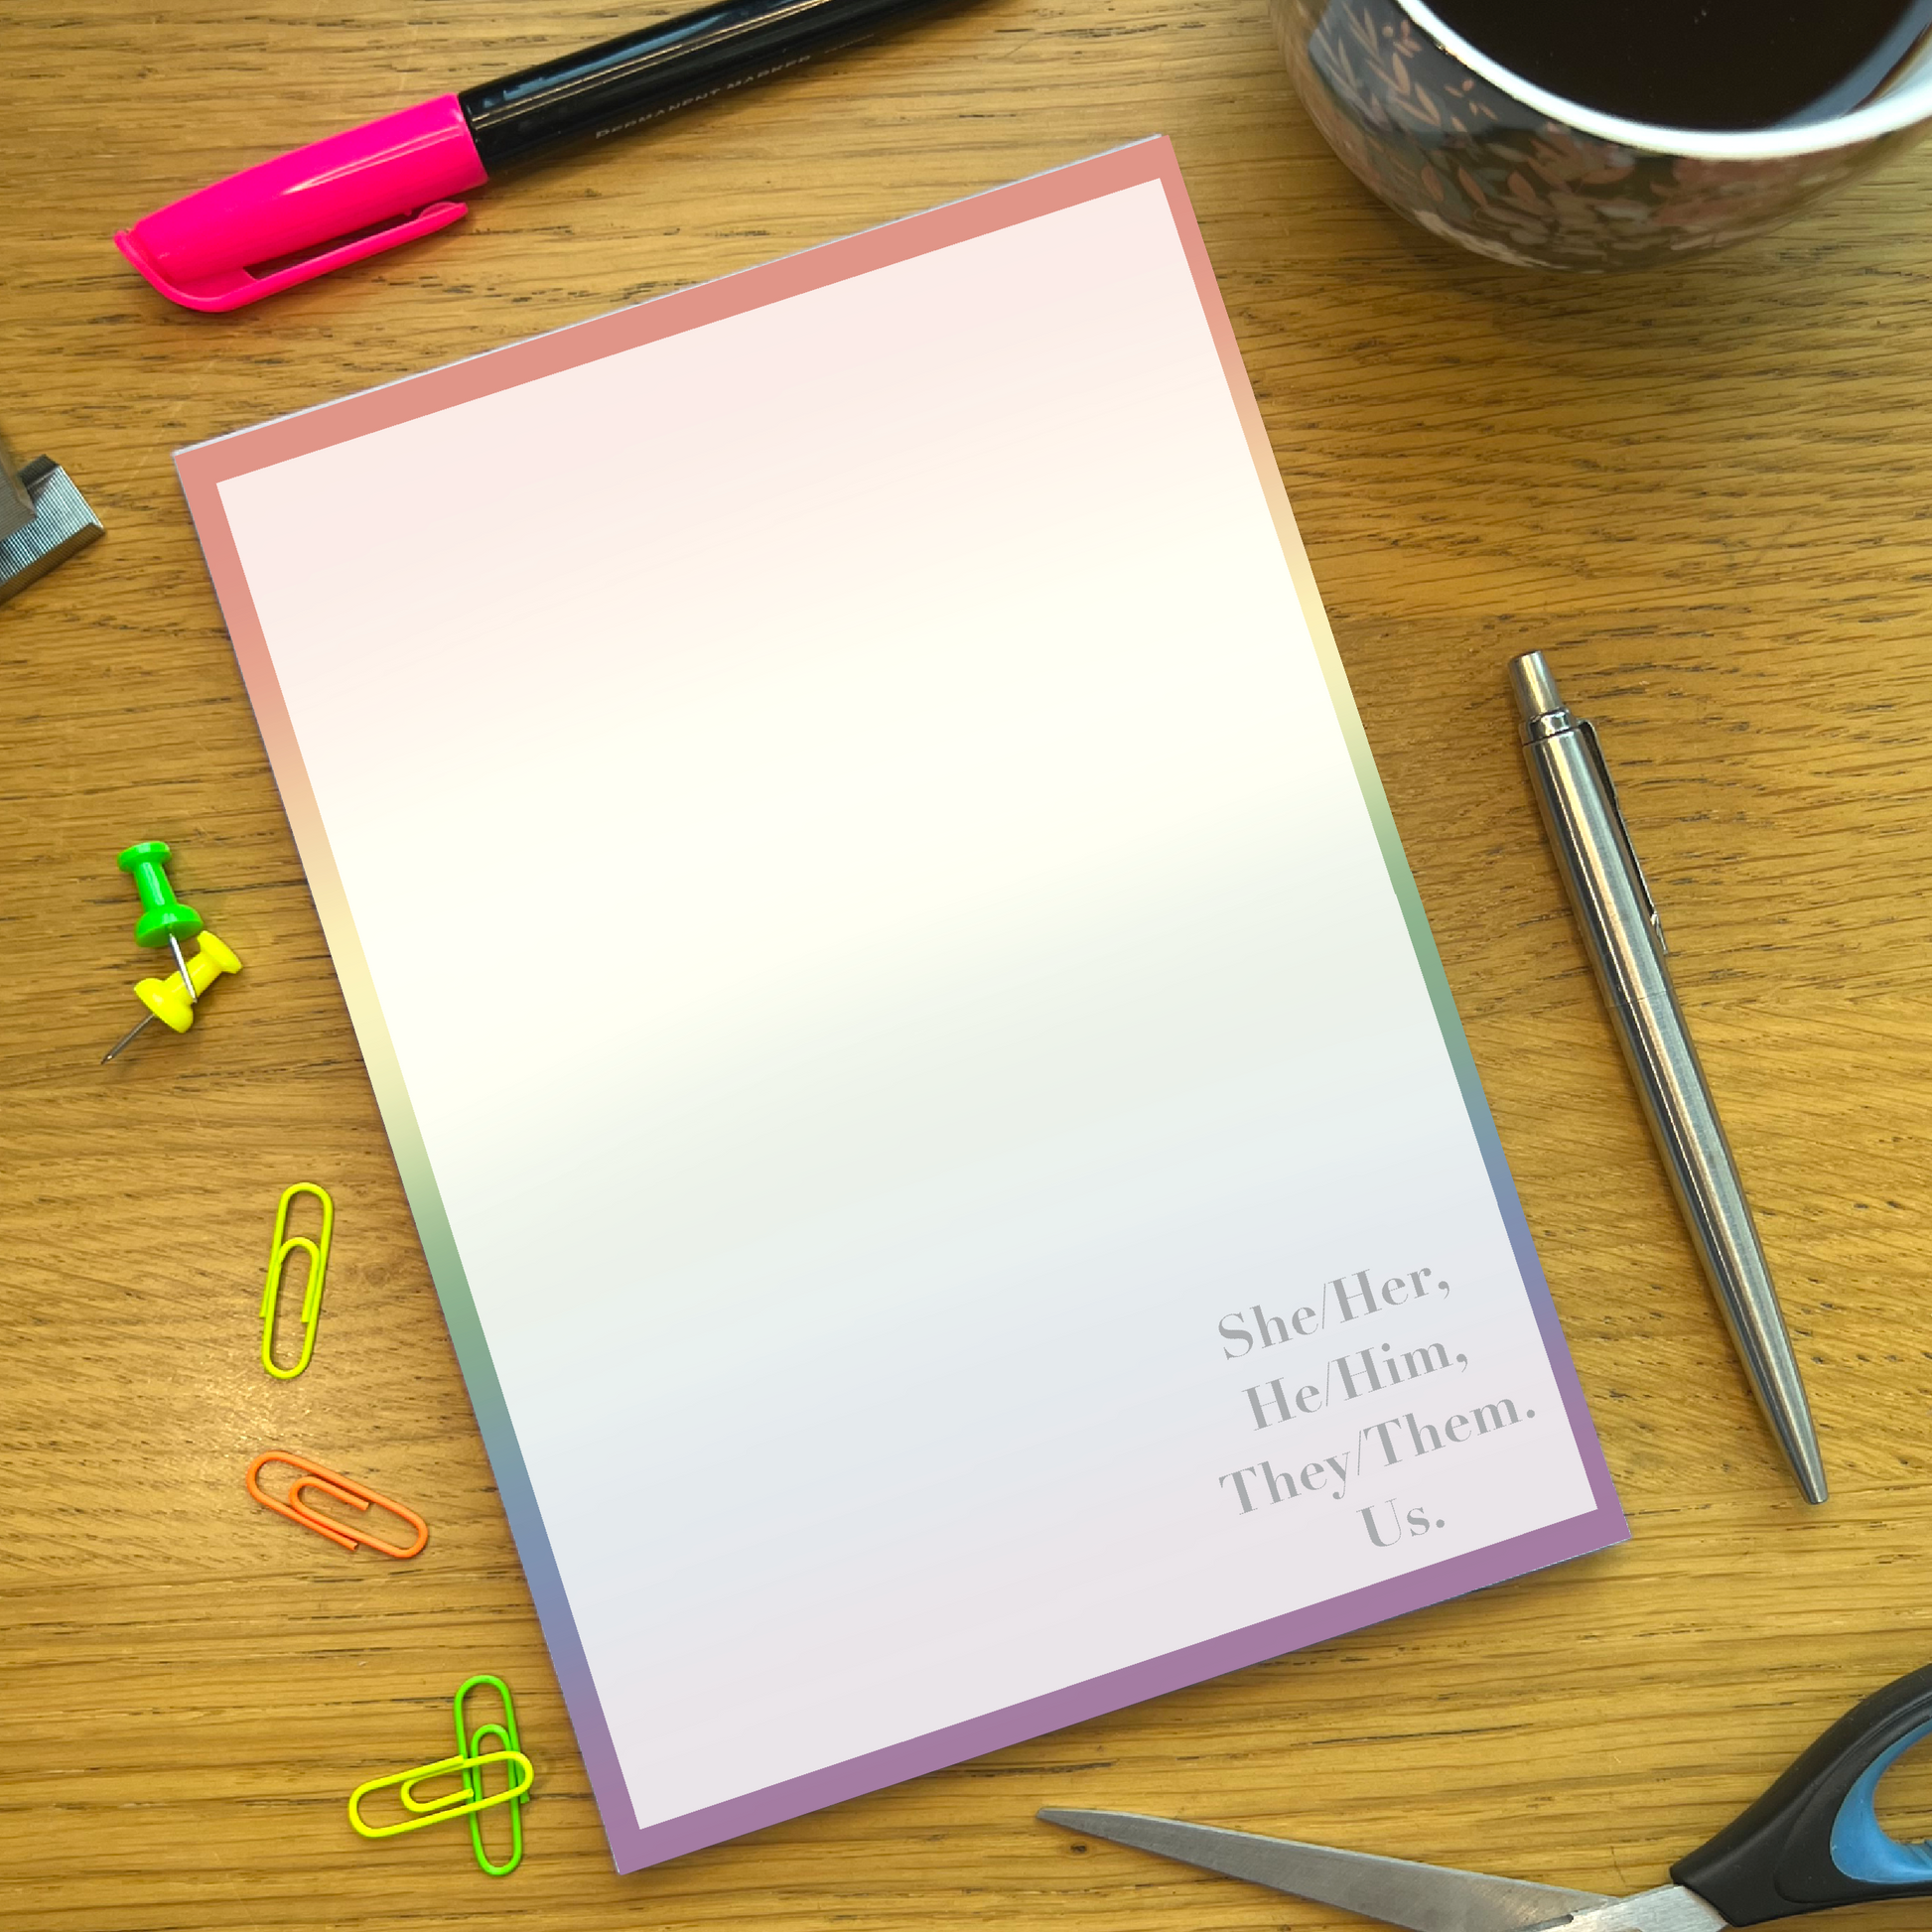 Rainbow pride notepad with quote She/her, He/him, They/them, Us, on a wooden desk with stationery